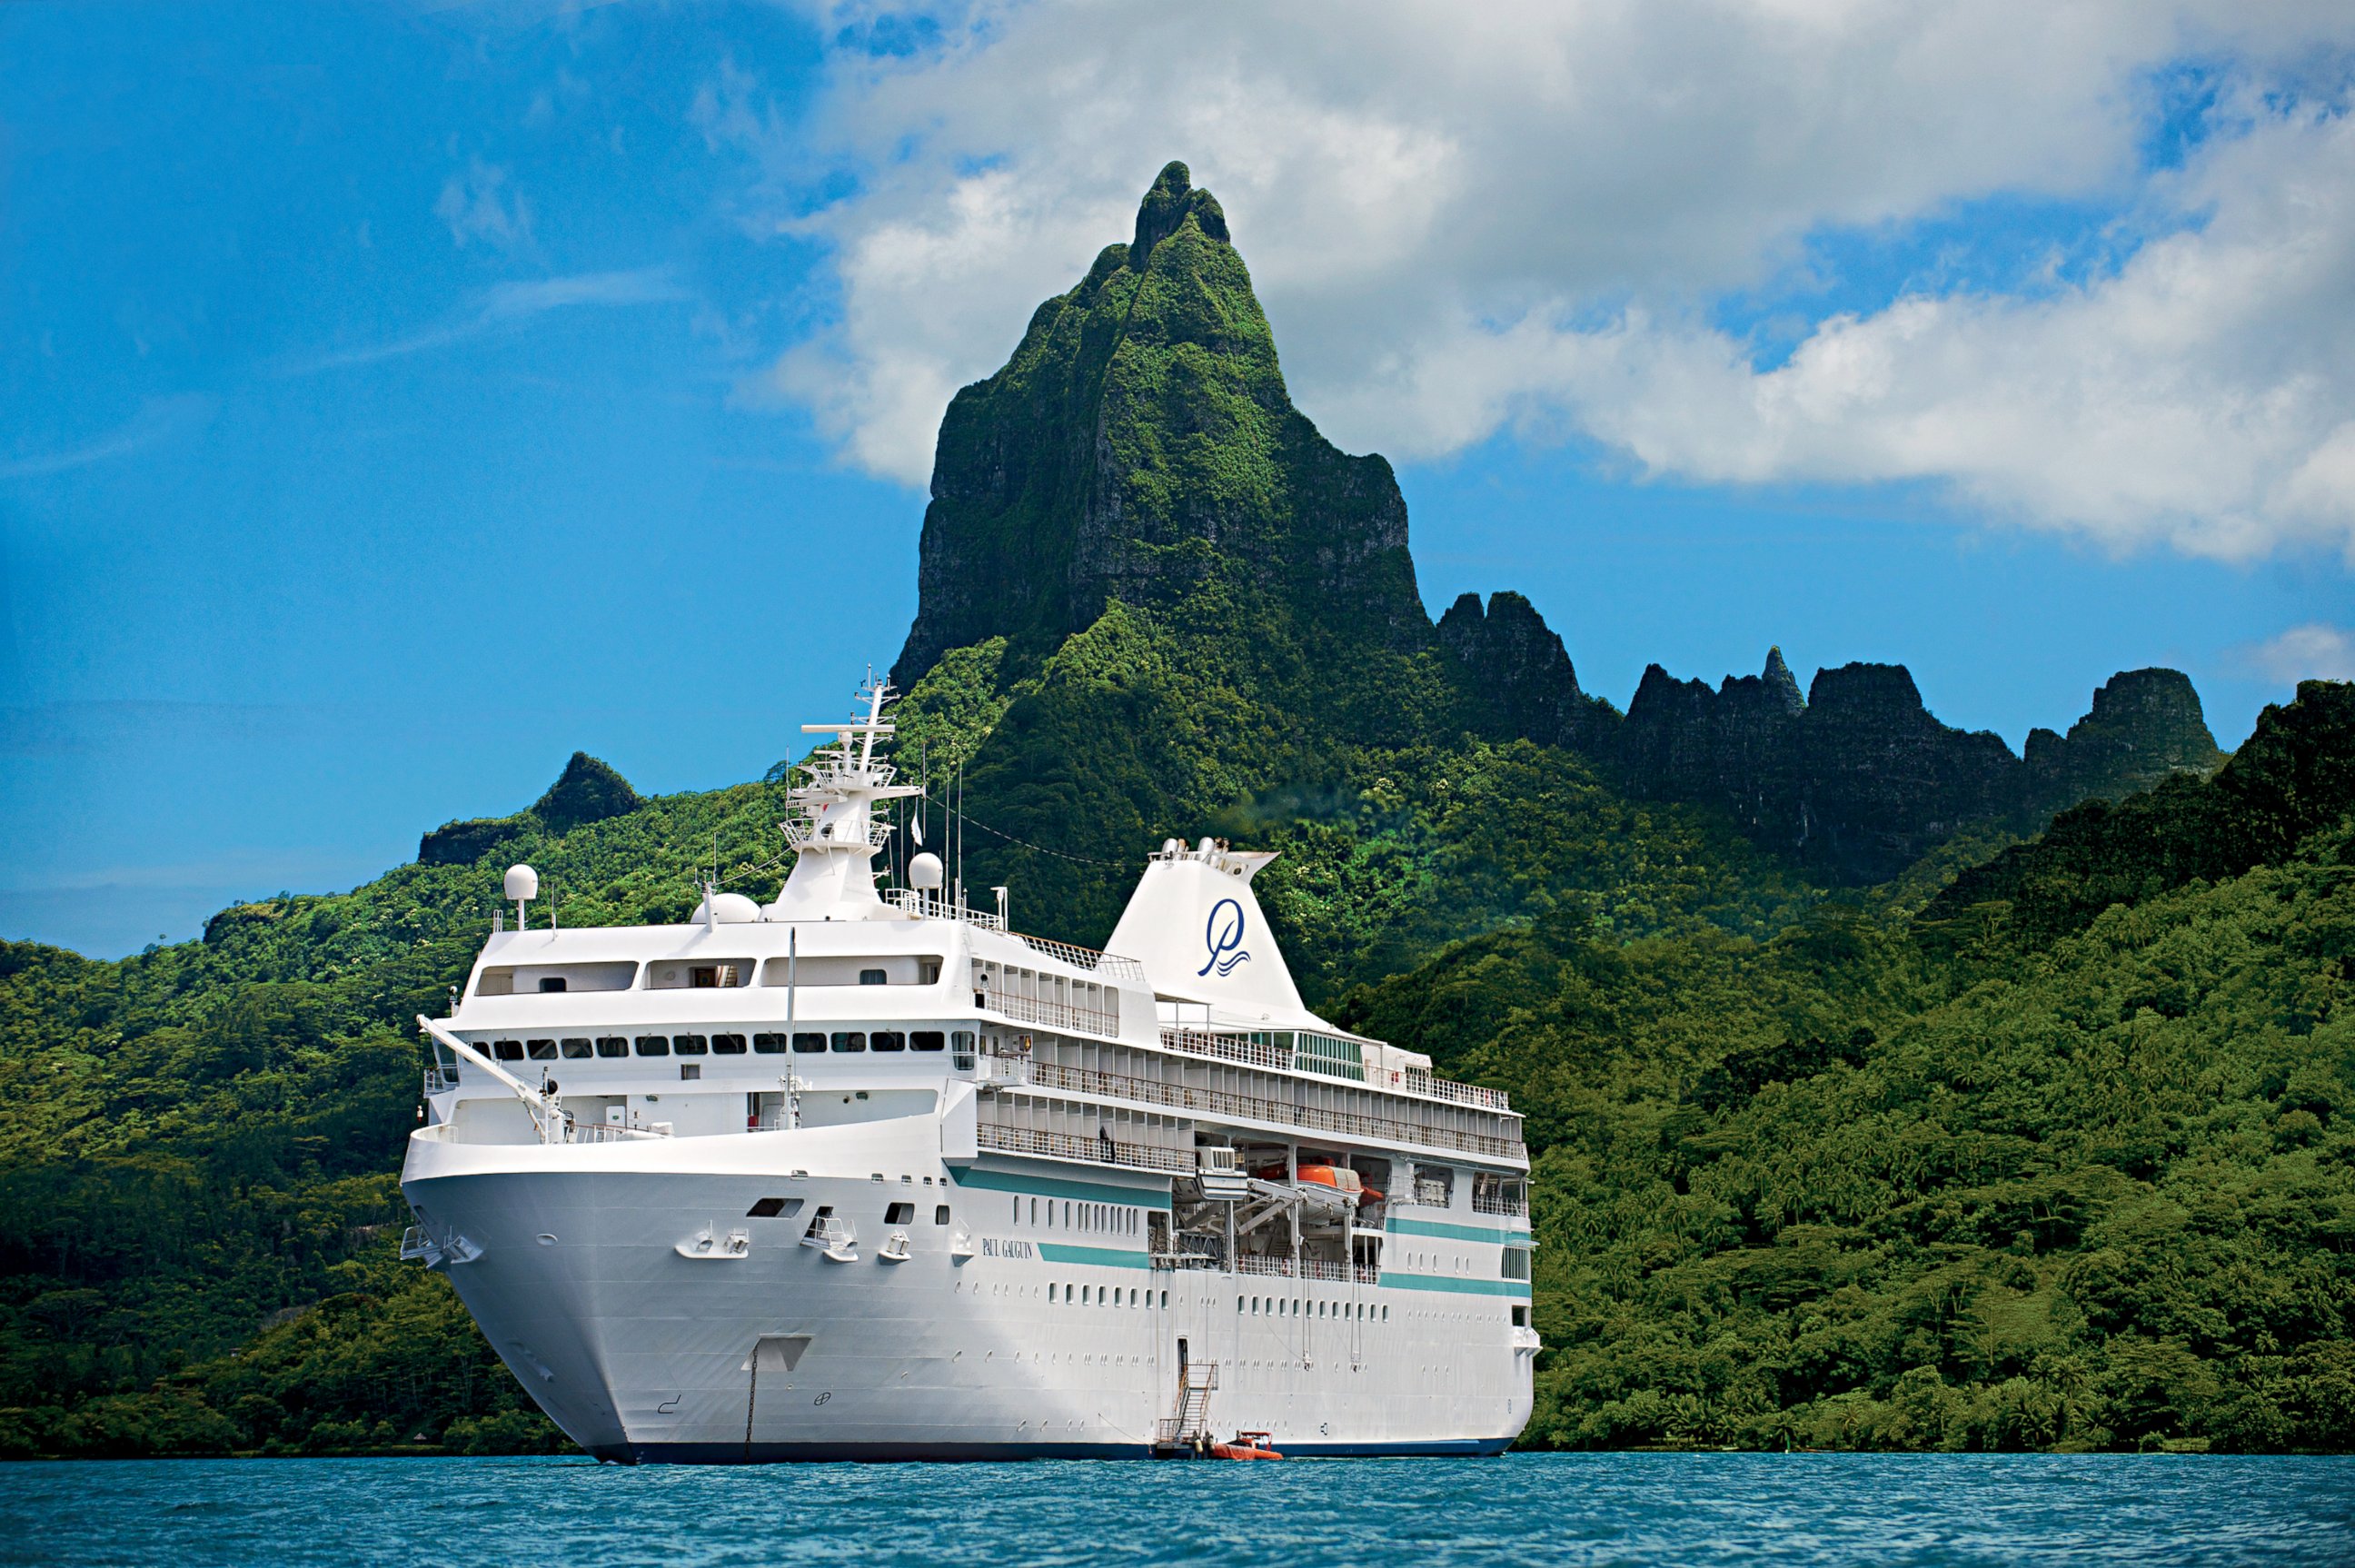 PHOTO: Built specifically to navigate the islands of French Polynesia, The Gauguin features a small size that allows her to maneuver from open ocean to shallow lagoon as nimbly as a yacht. 